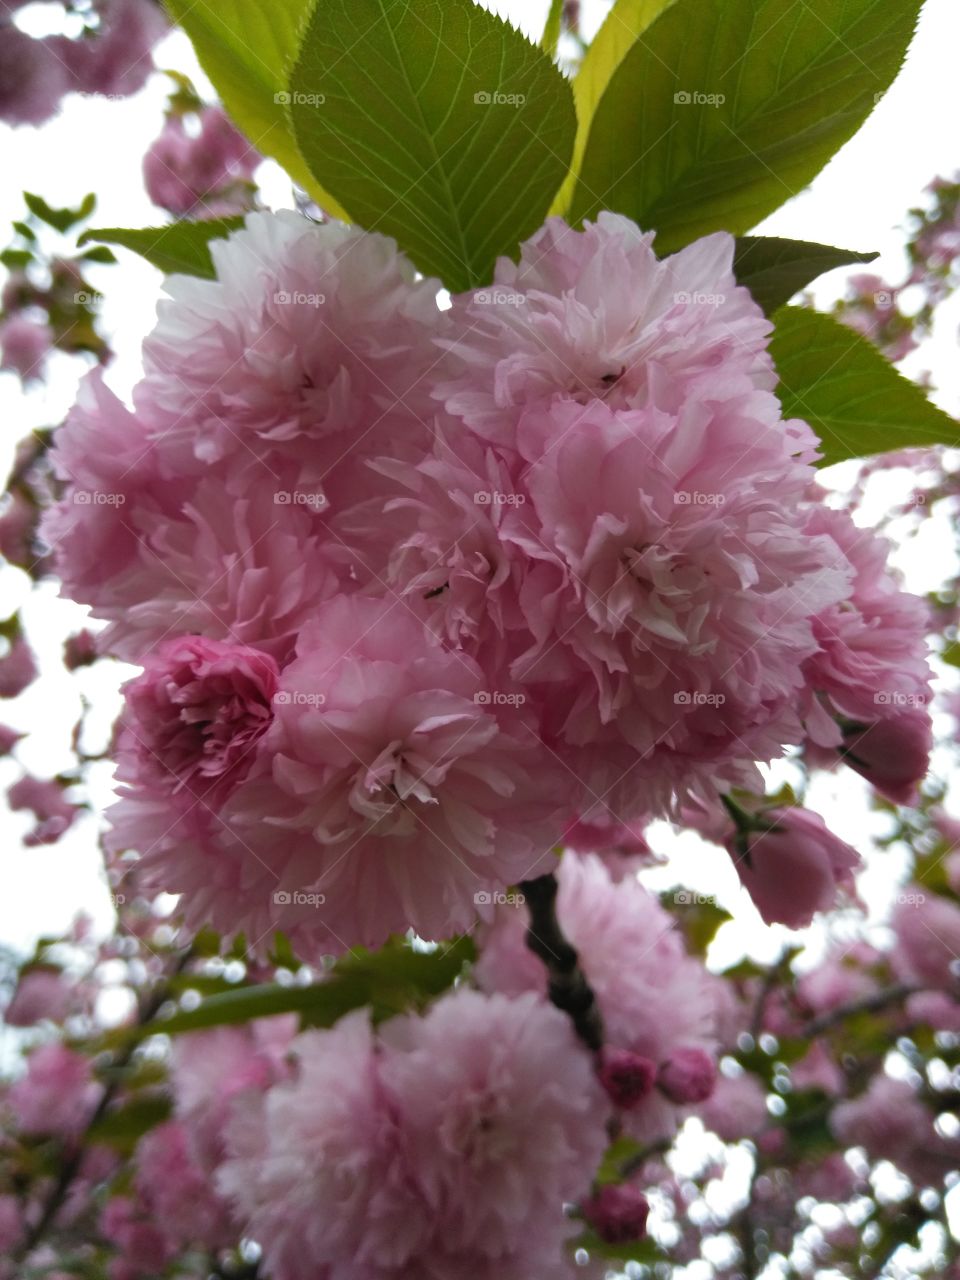 Delicate cluster of fresh spring pink carnationlike blooms on a cloudy day, close up views.